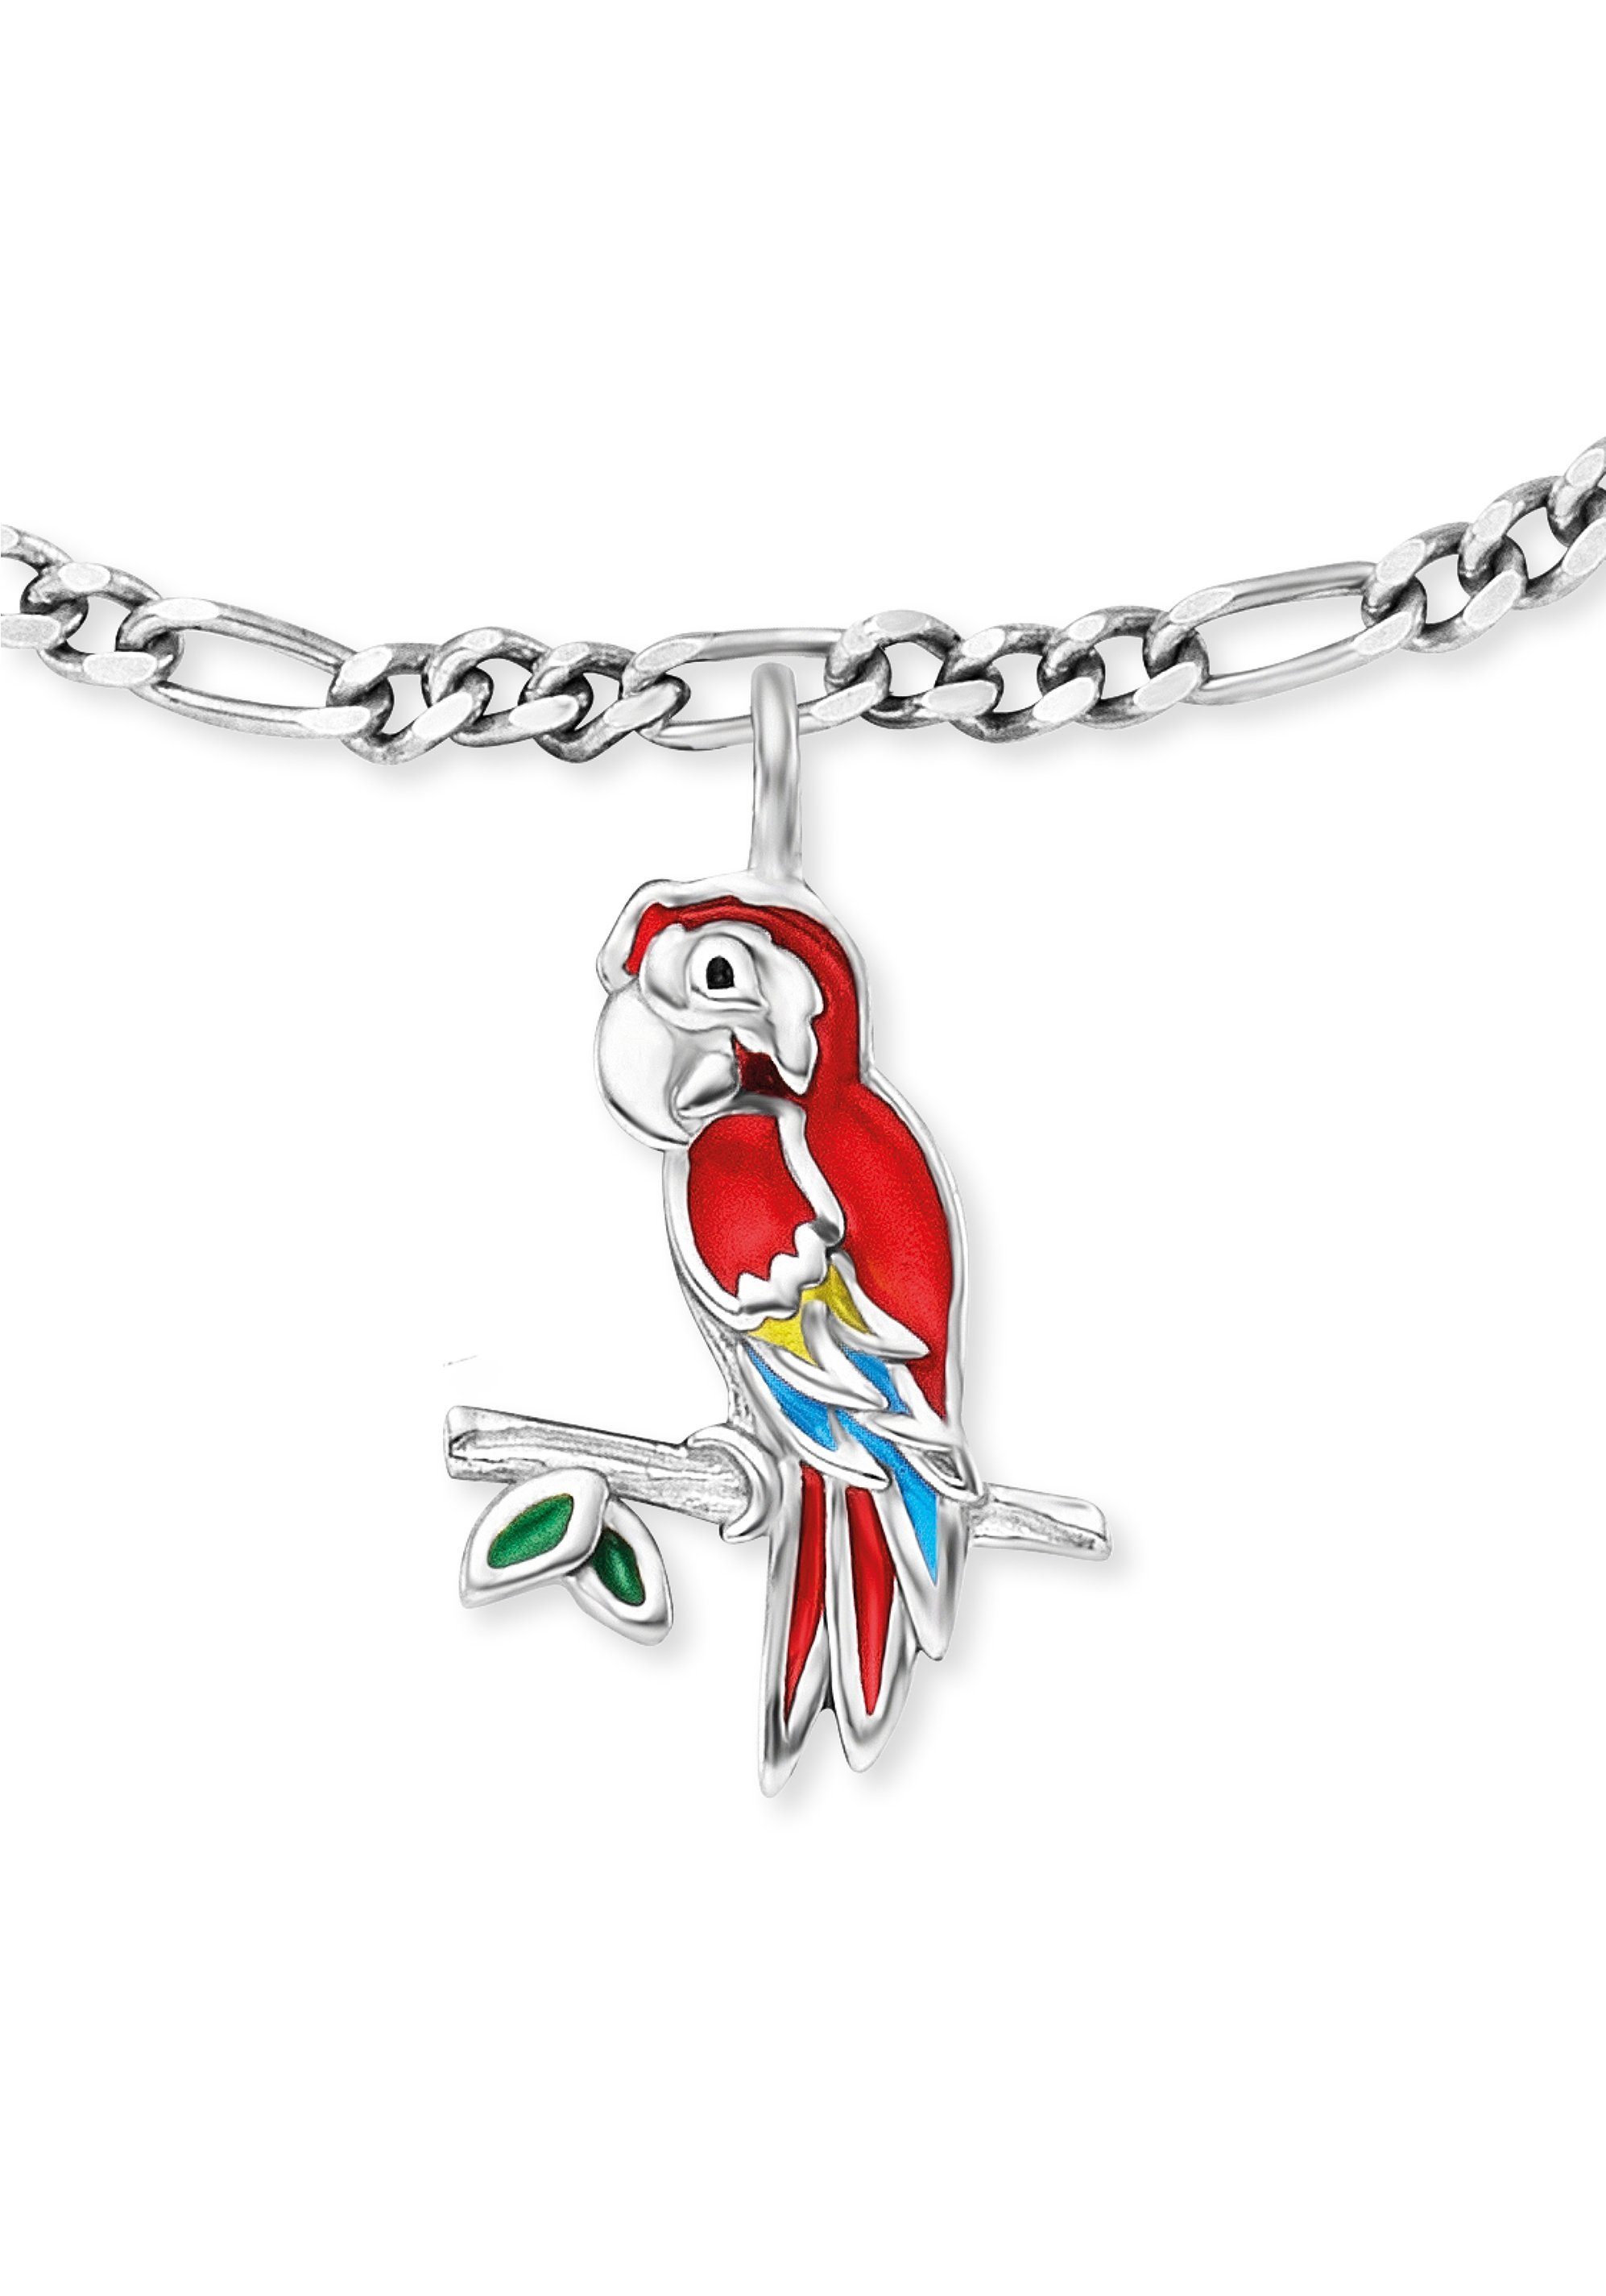 HEB-PARROT, mit Herzengel Emaille Papagei, Armband